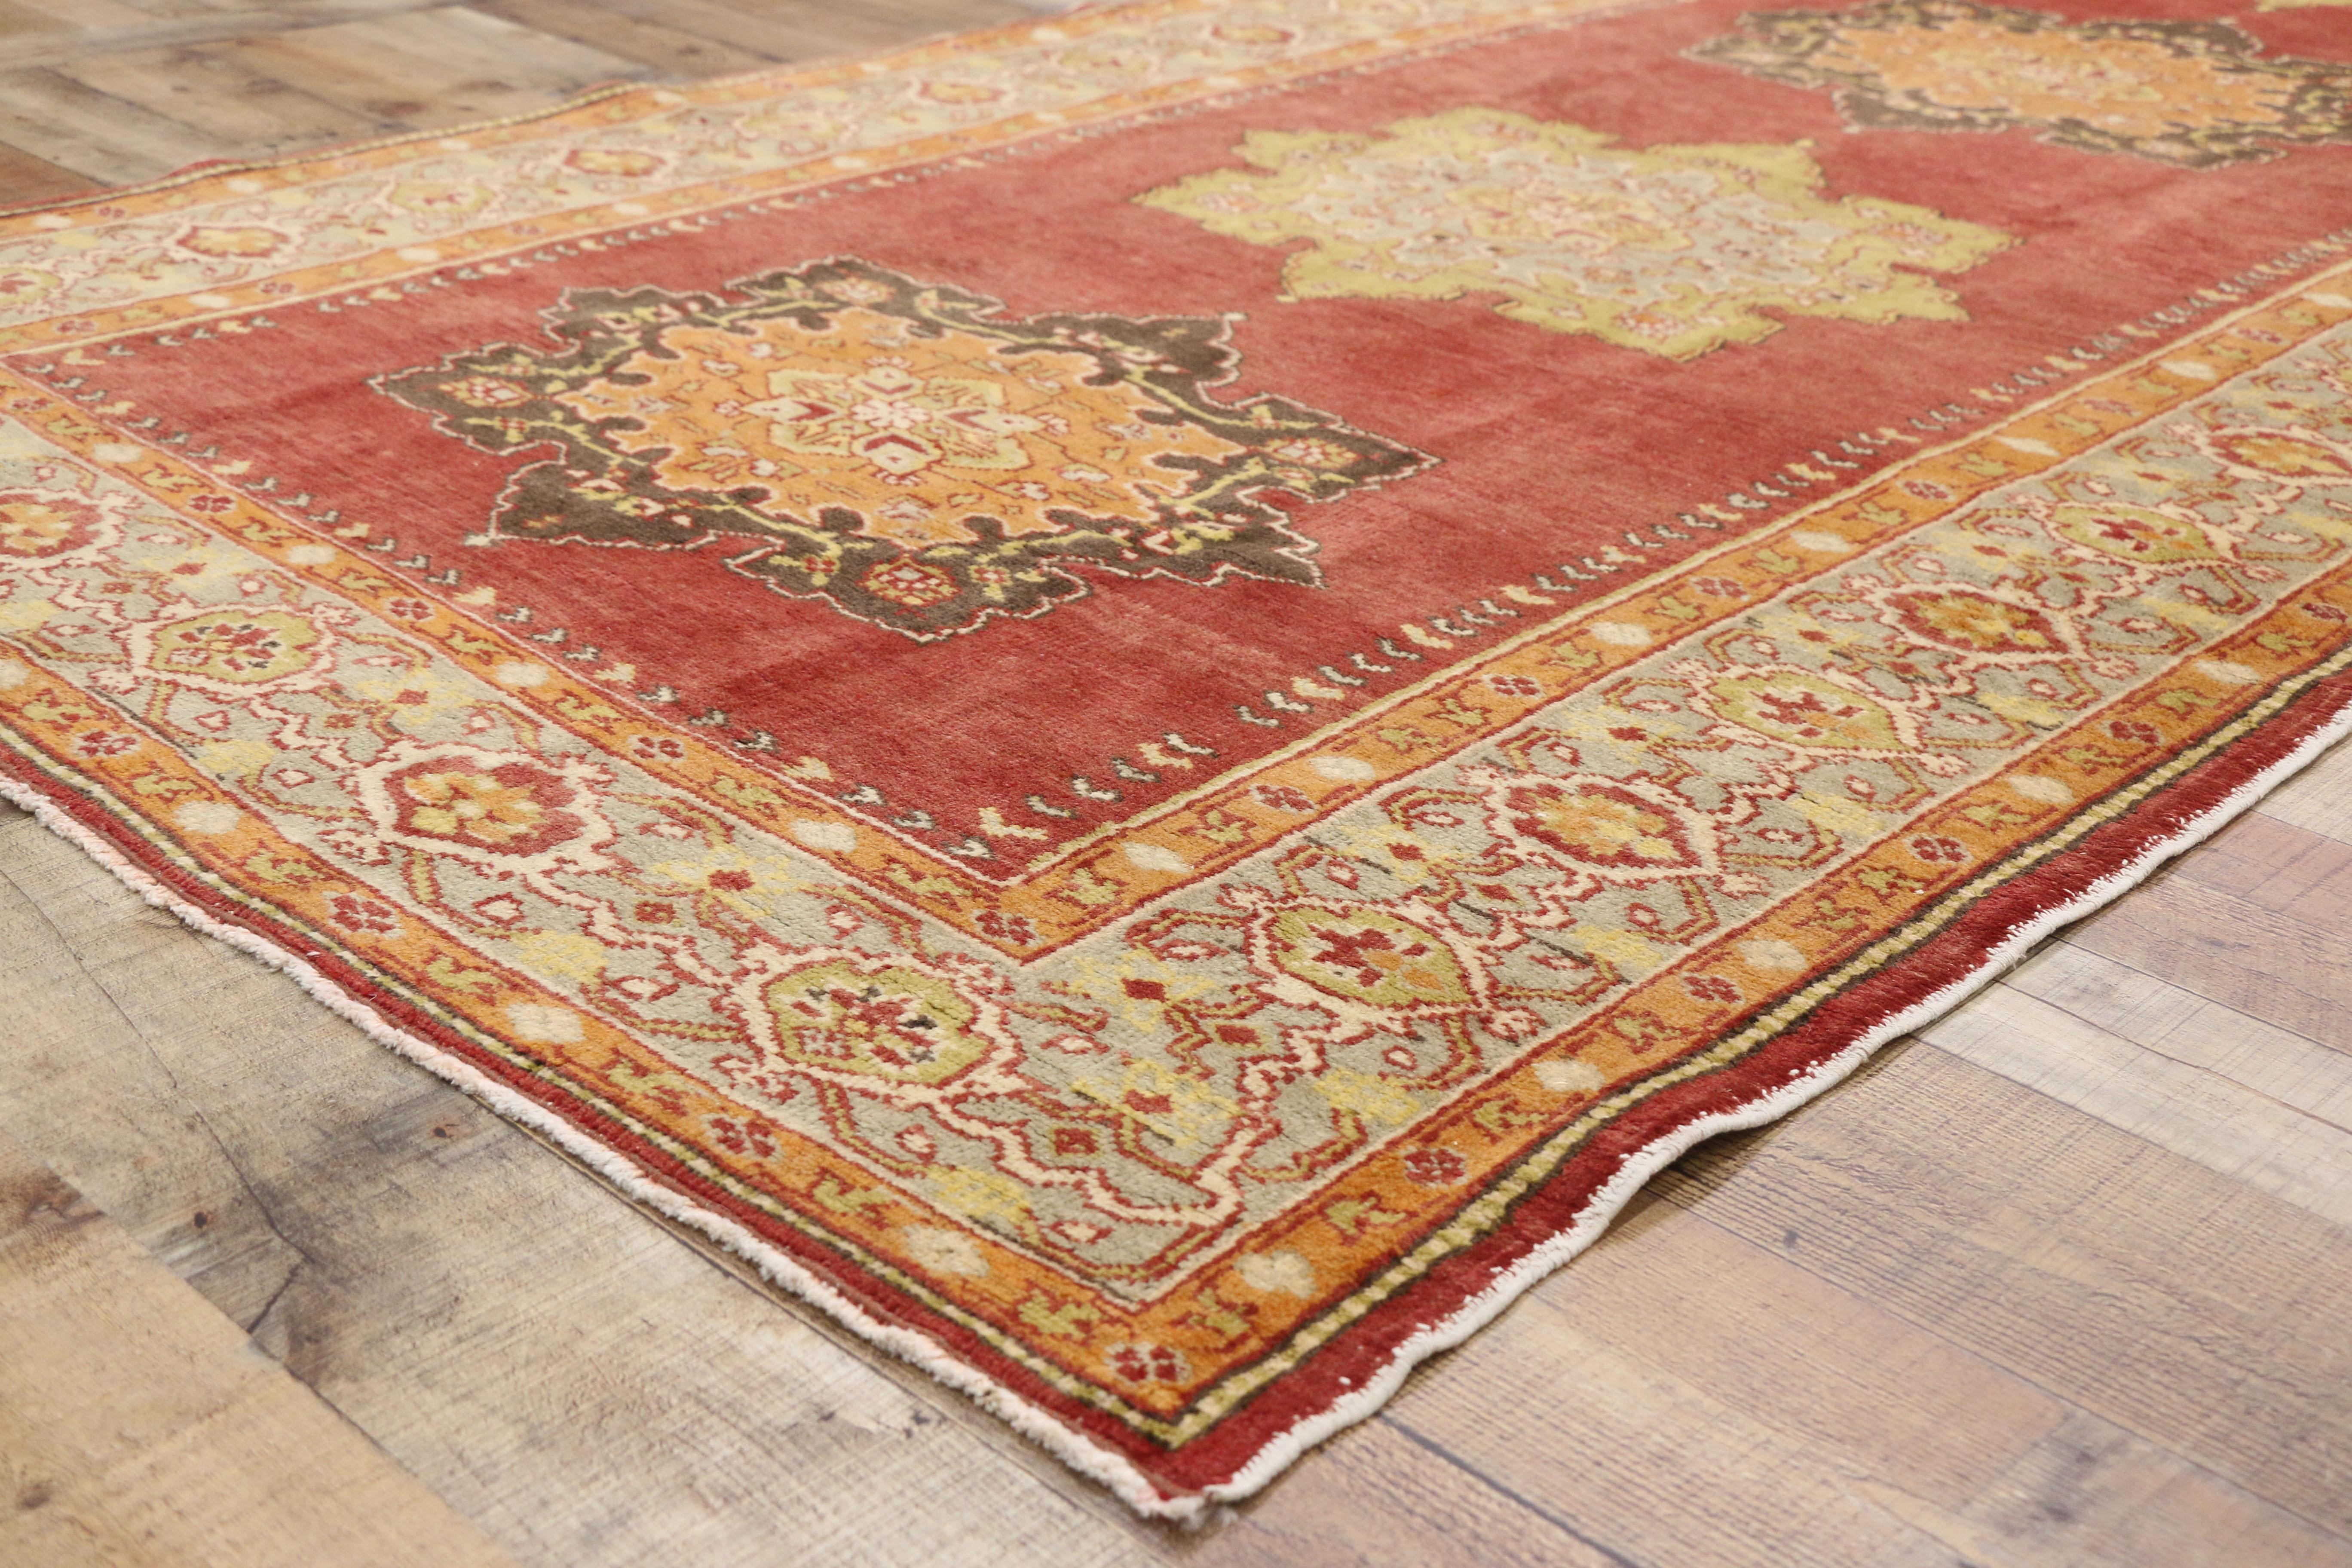 Vintage Turkish Oushak Wide Hallway Runner with Spanish Revival Style In Good Condition For Sale In Dallas, TX